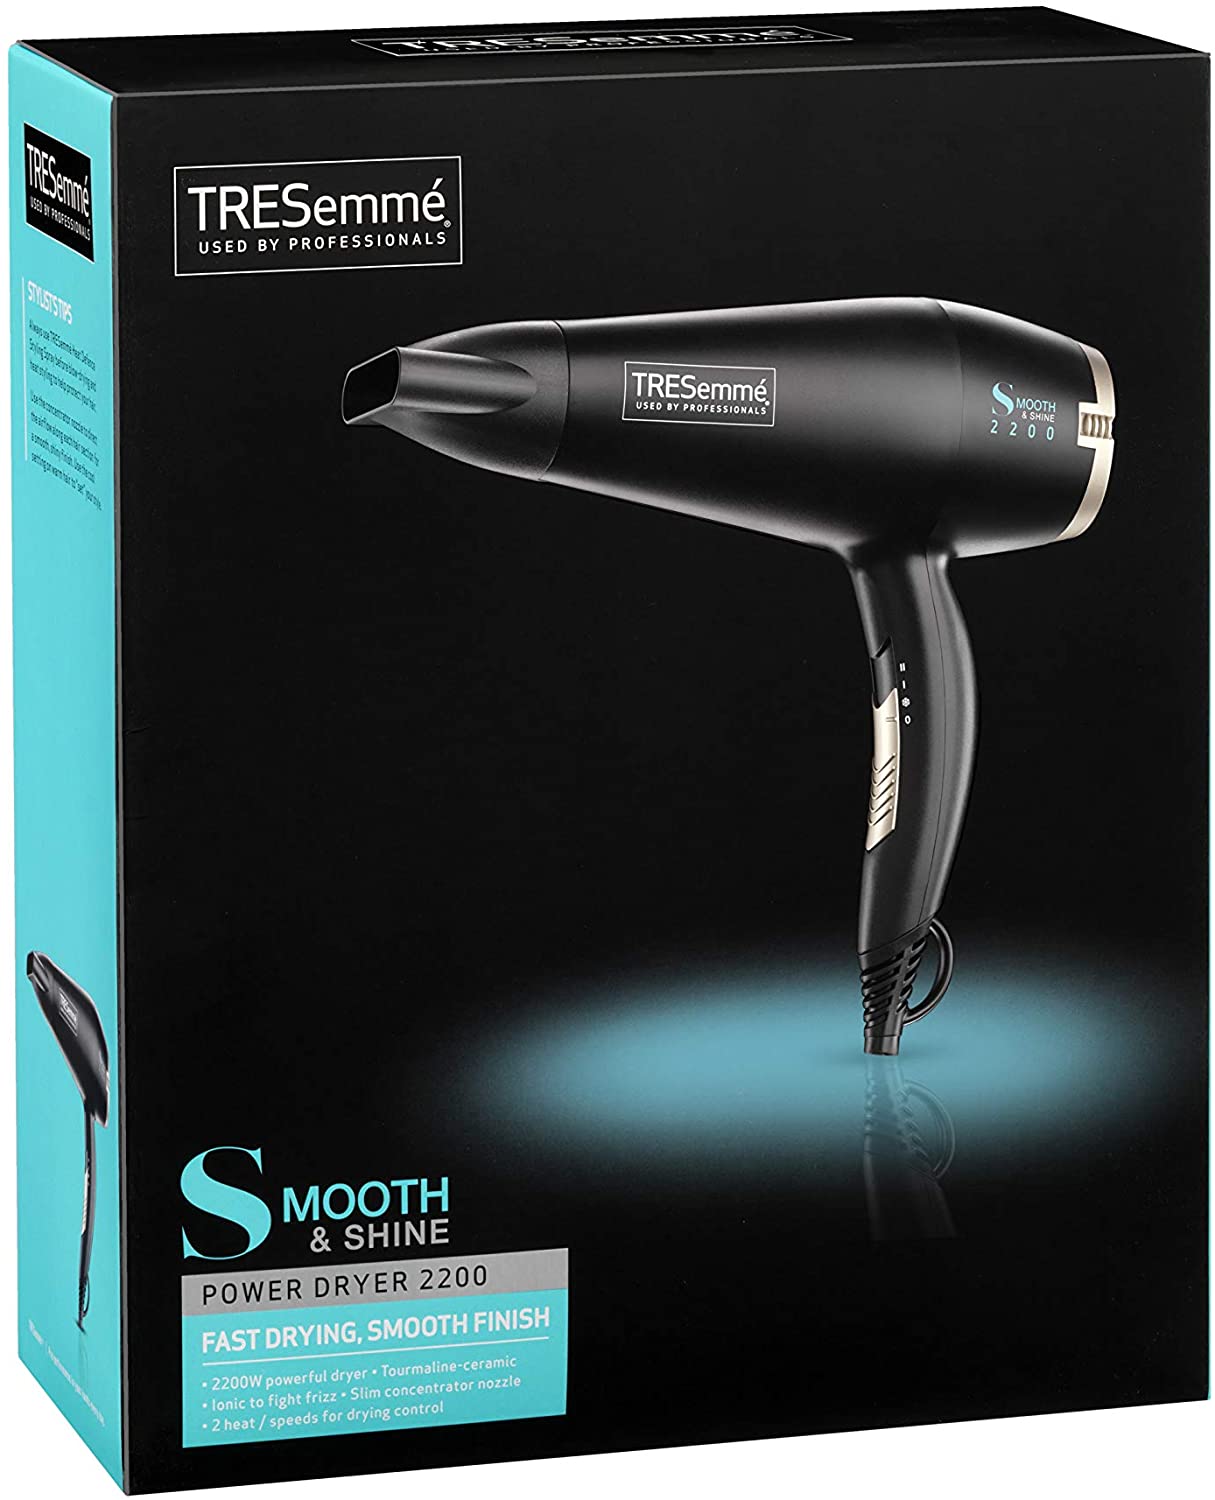 Tresemme 5542du 2200w power smooth and shine dryer